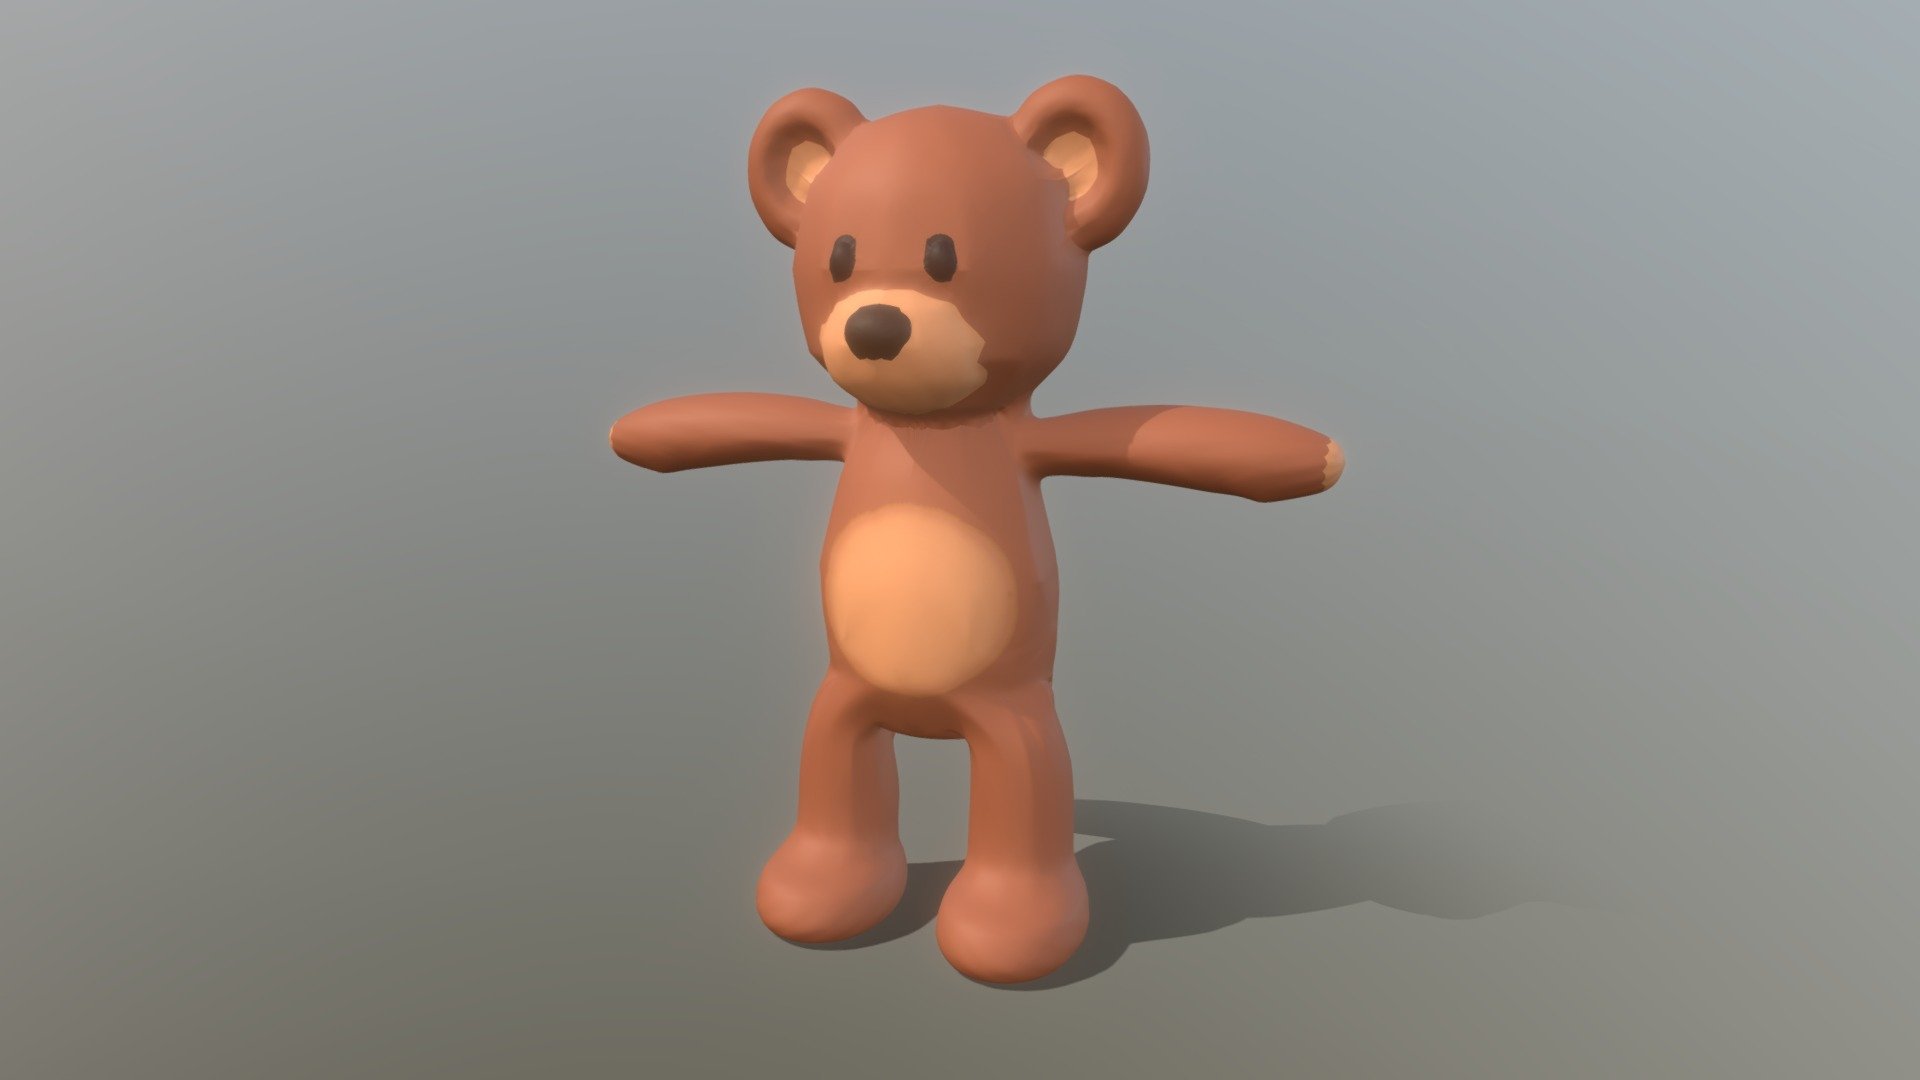 Model made for a game I made - Teddy Bear Plush - 3D model by tiago-chefe 3d model